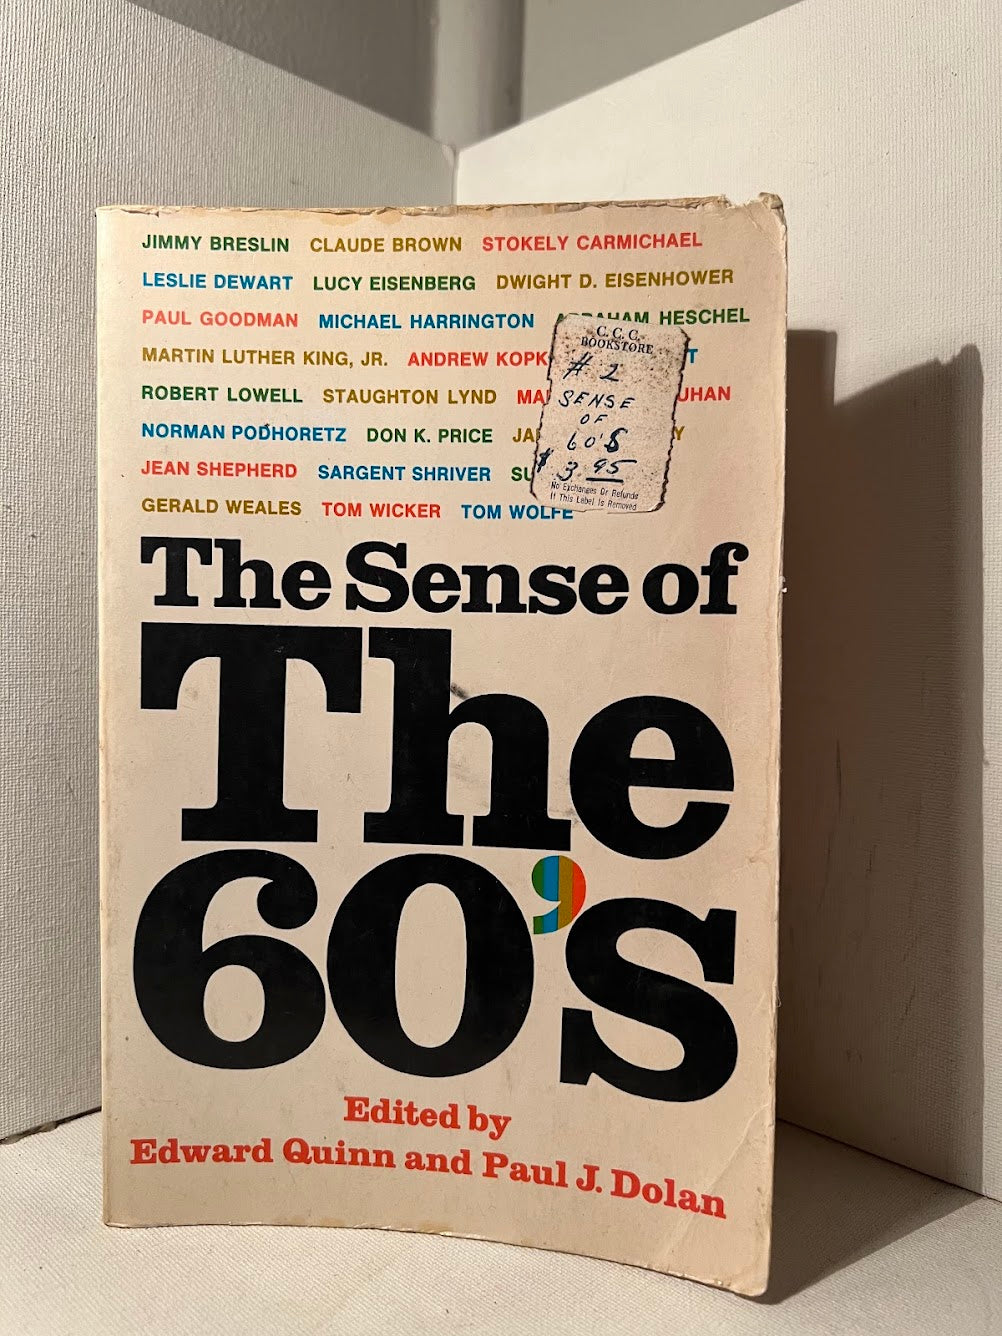 The Sense of the 60's edited by Edward Quinn and Paul J. Dolan